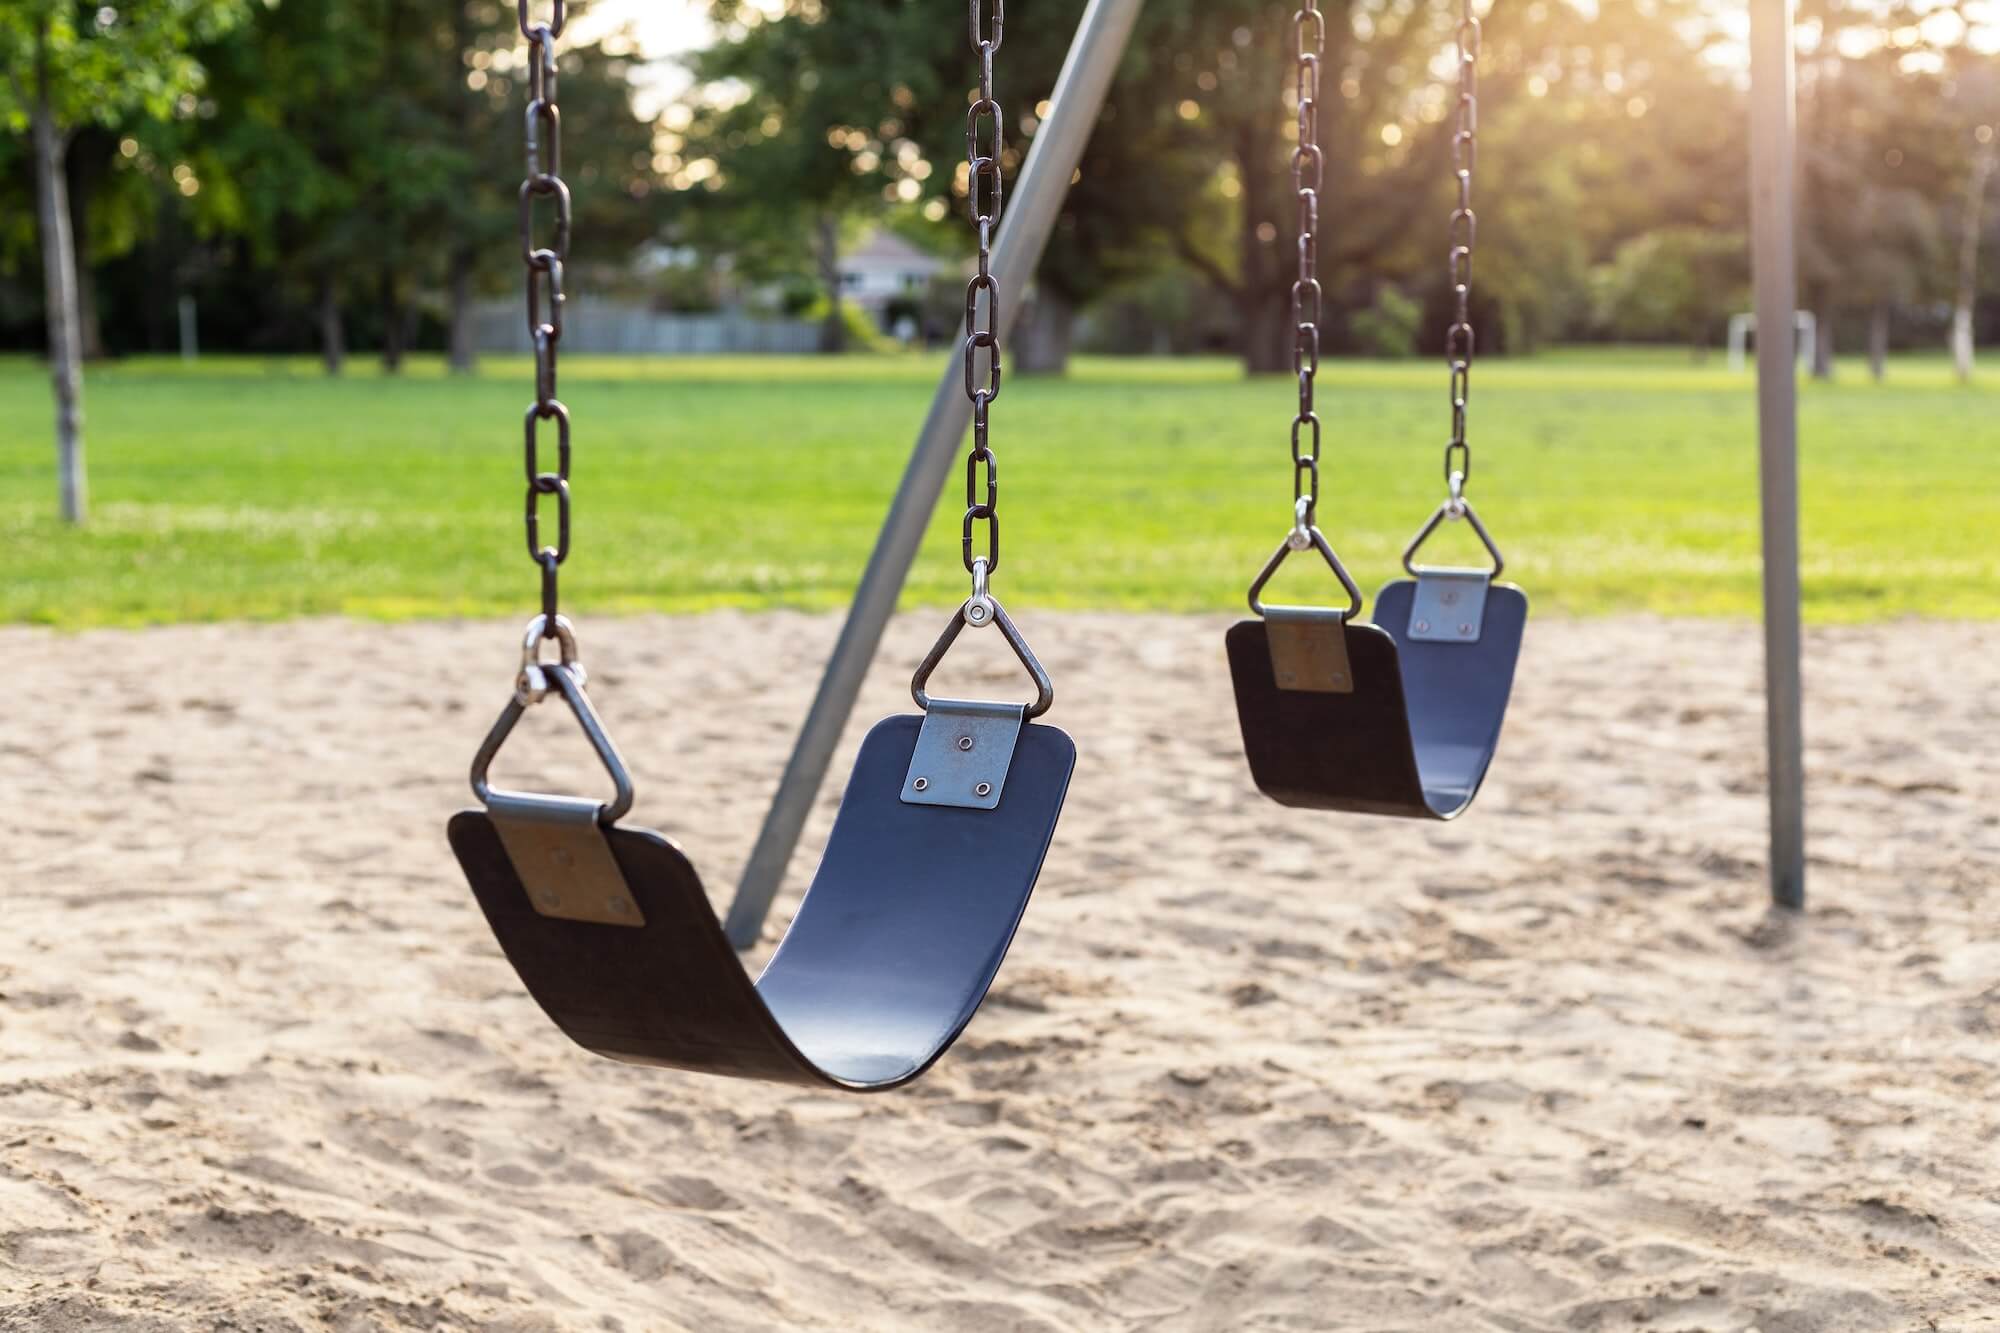 playground for children with swings in the public park near school yard during sunset